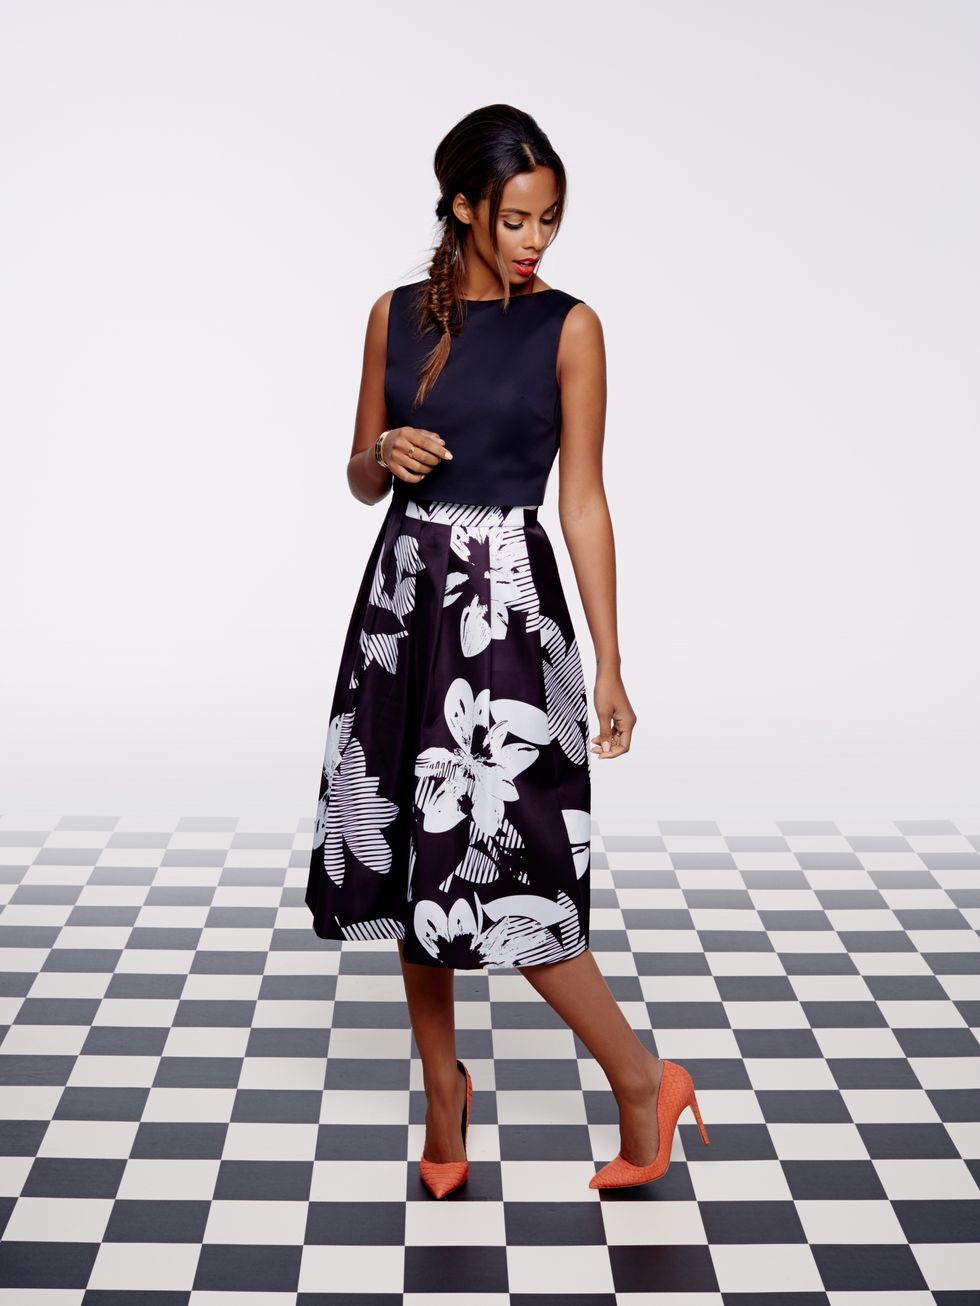 Rochelle Humes for Very.co.uk SS15